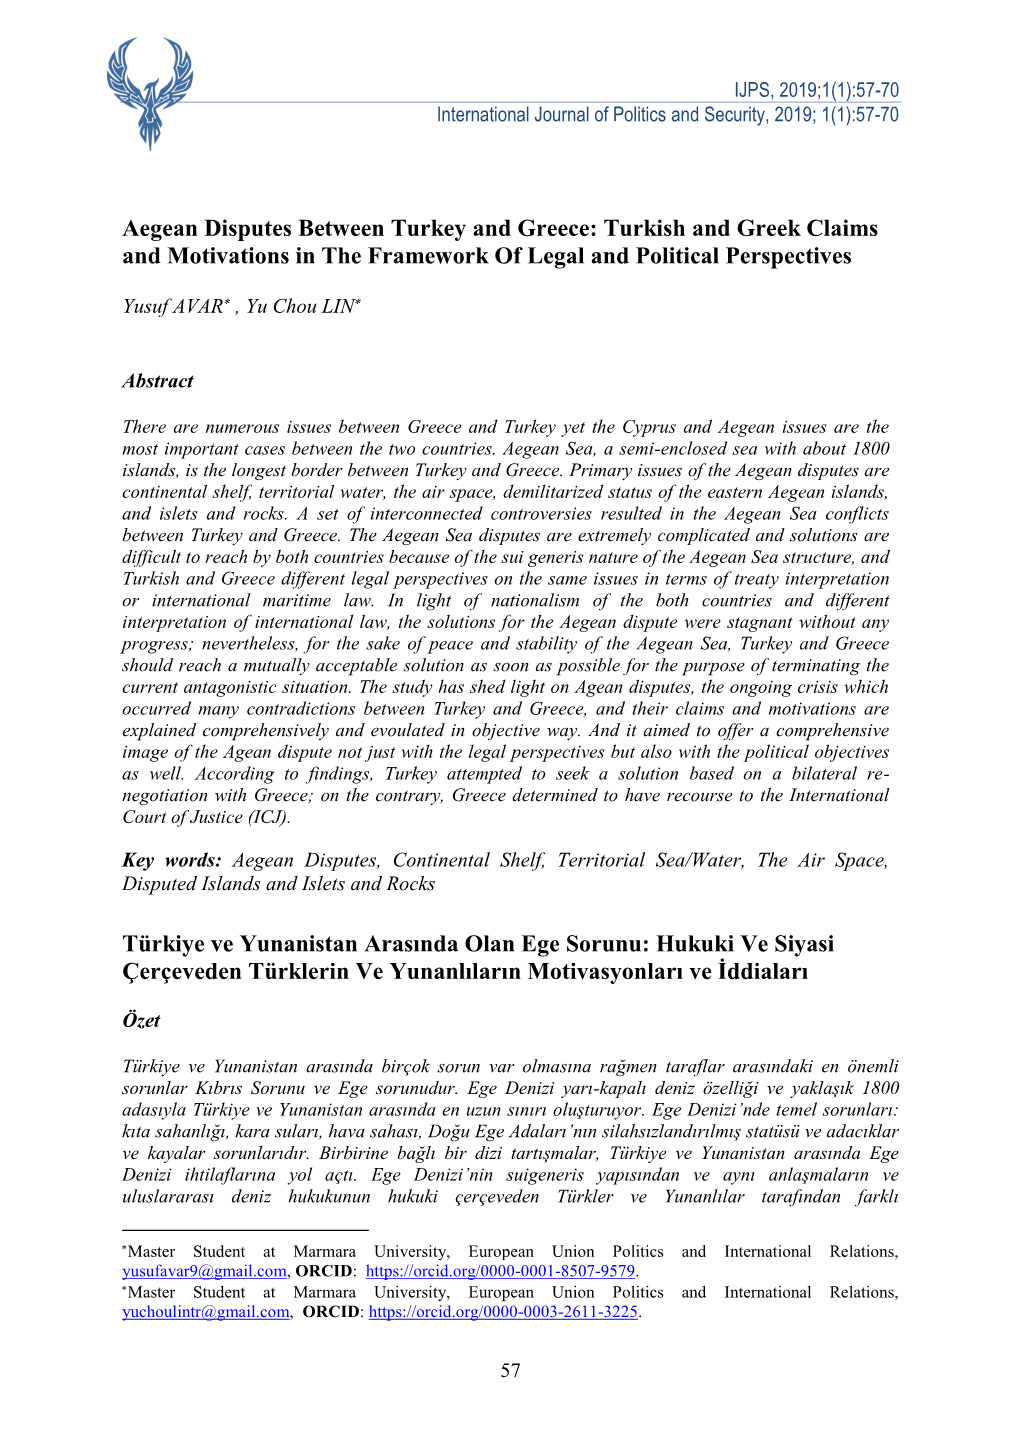 Aegean Disputes Between Turkey and Greece: Turkish and Greek Claims and Motivations in the Framework of Legal and Political Perspectives